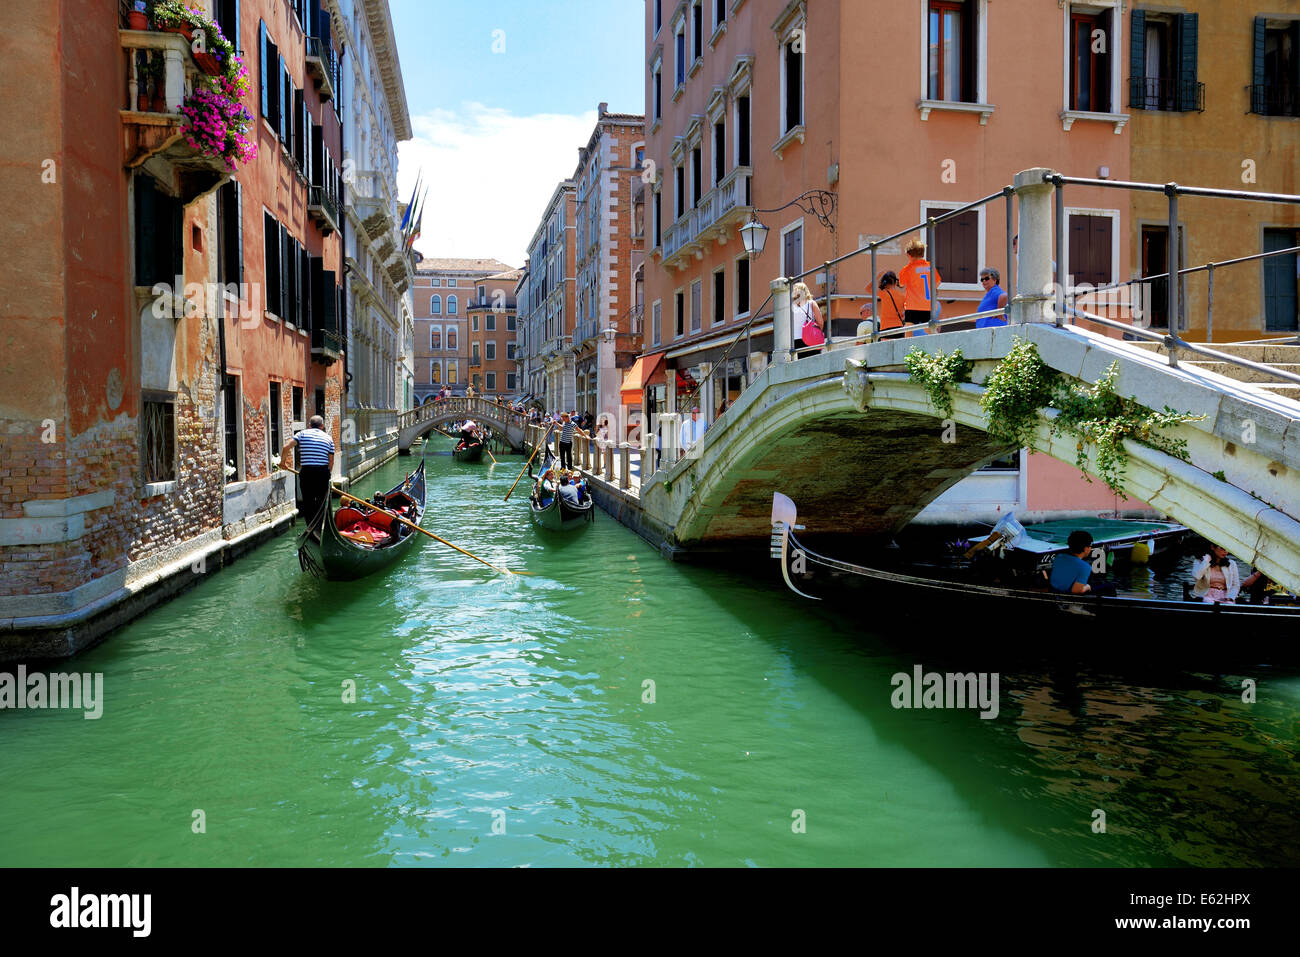 The gondolas with tourists are on water channel, Venice, Italy Stock Photo